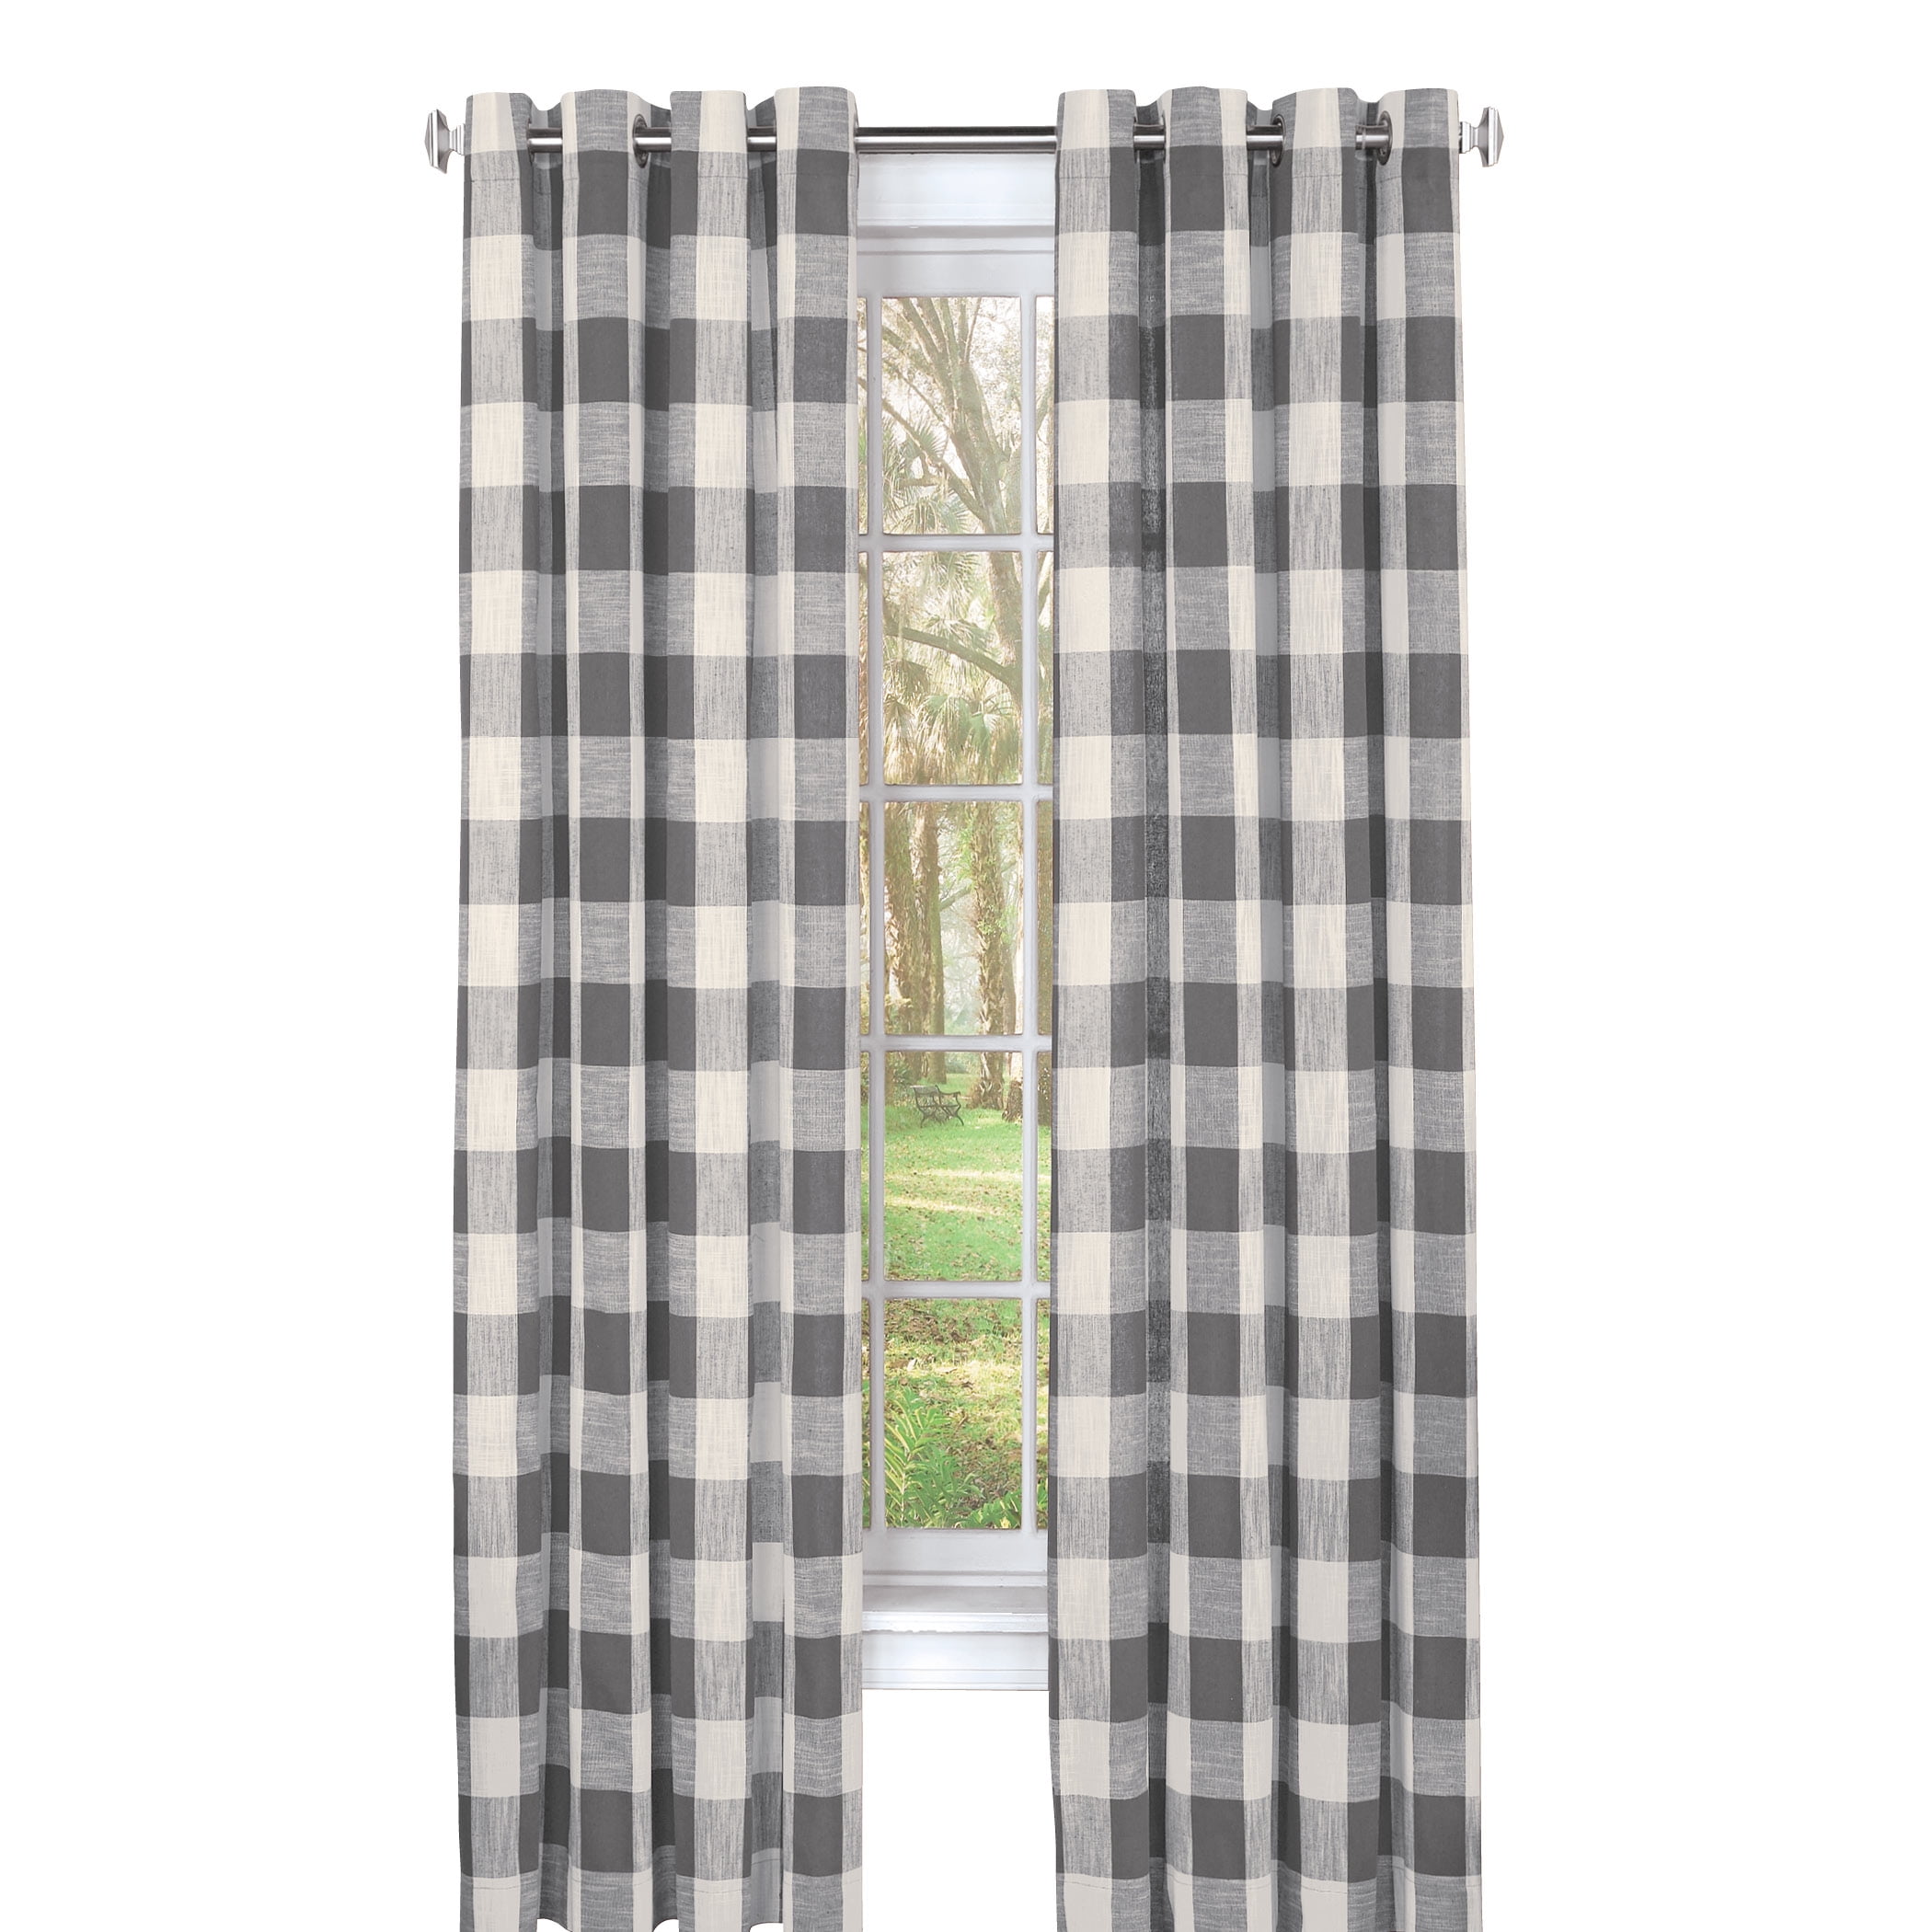 63" length Courtyard Plaid Woven Curtain Panel with Grommets Lorraine Gray 